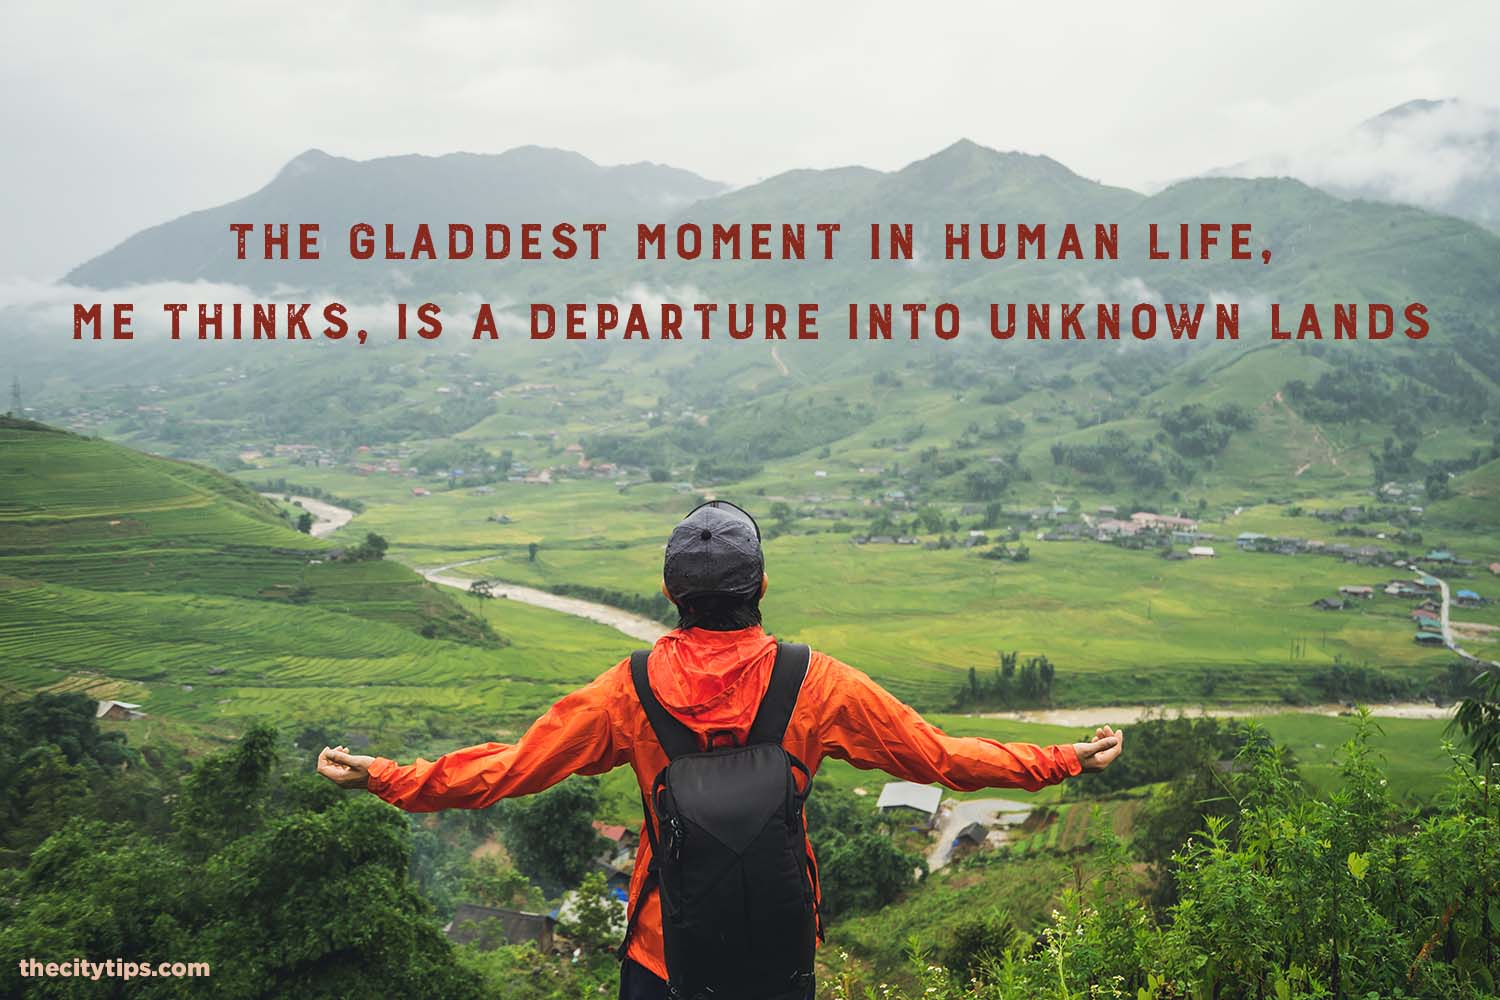 "The gladdest moment in human life, me thinks, is a departure into unknown lands." by Sir Richard Burton